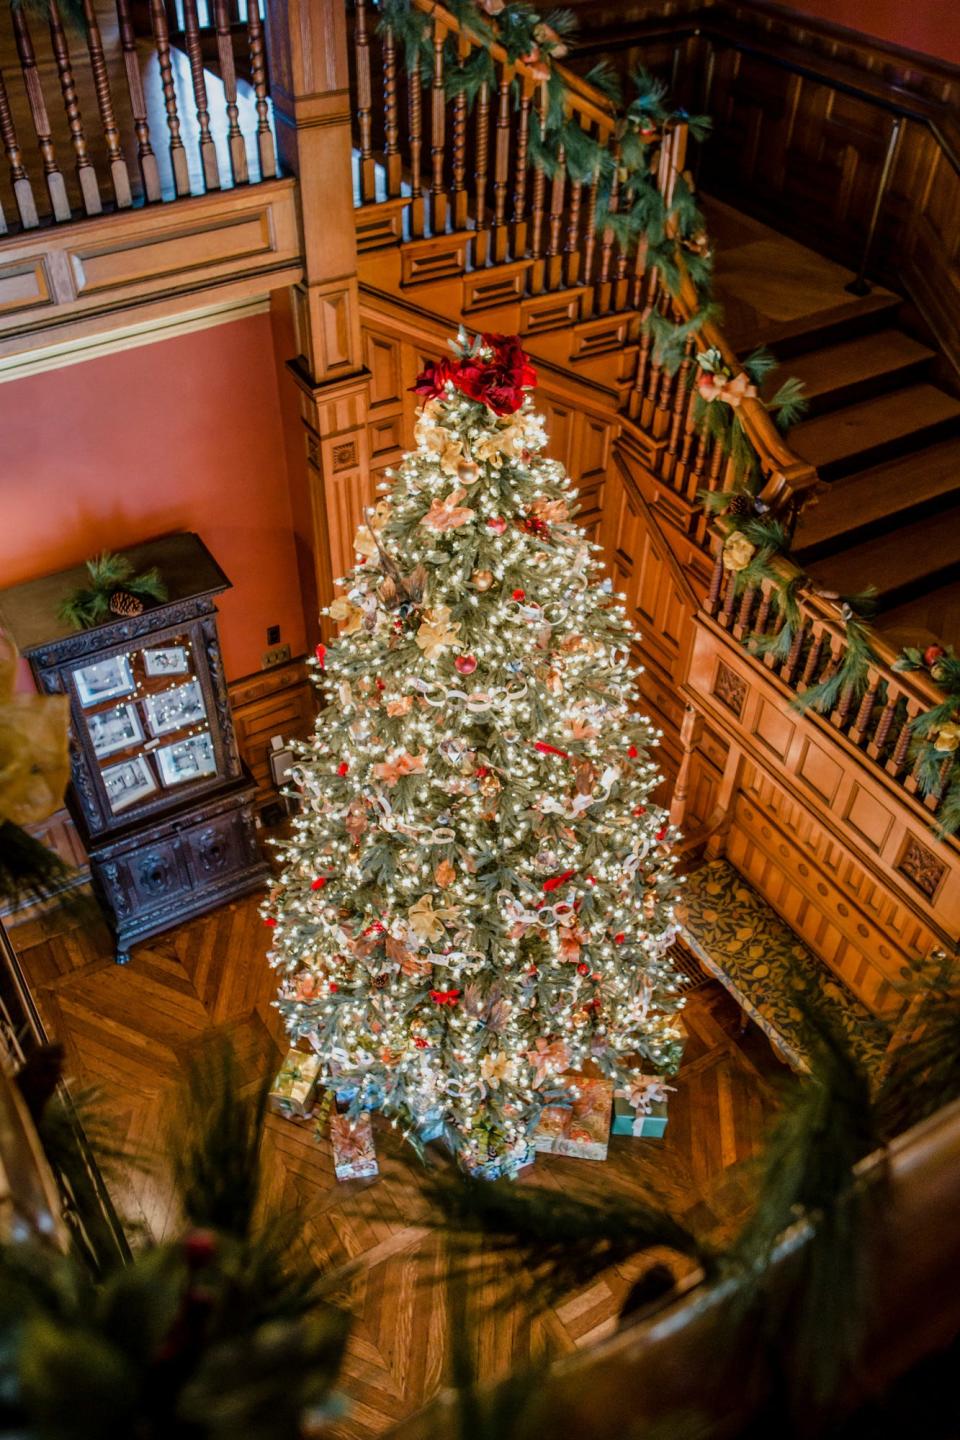 The 1878 Eustis Estate is one of the state’s largest Gilded Age mansions and its halls will be decked for the Christmas season.